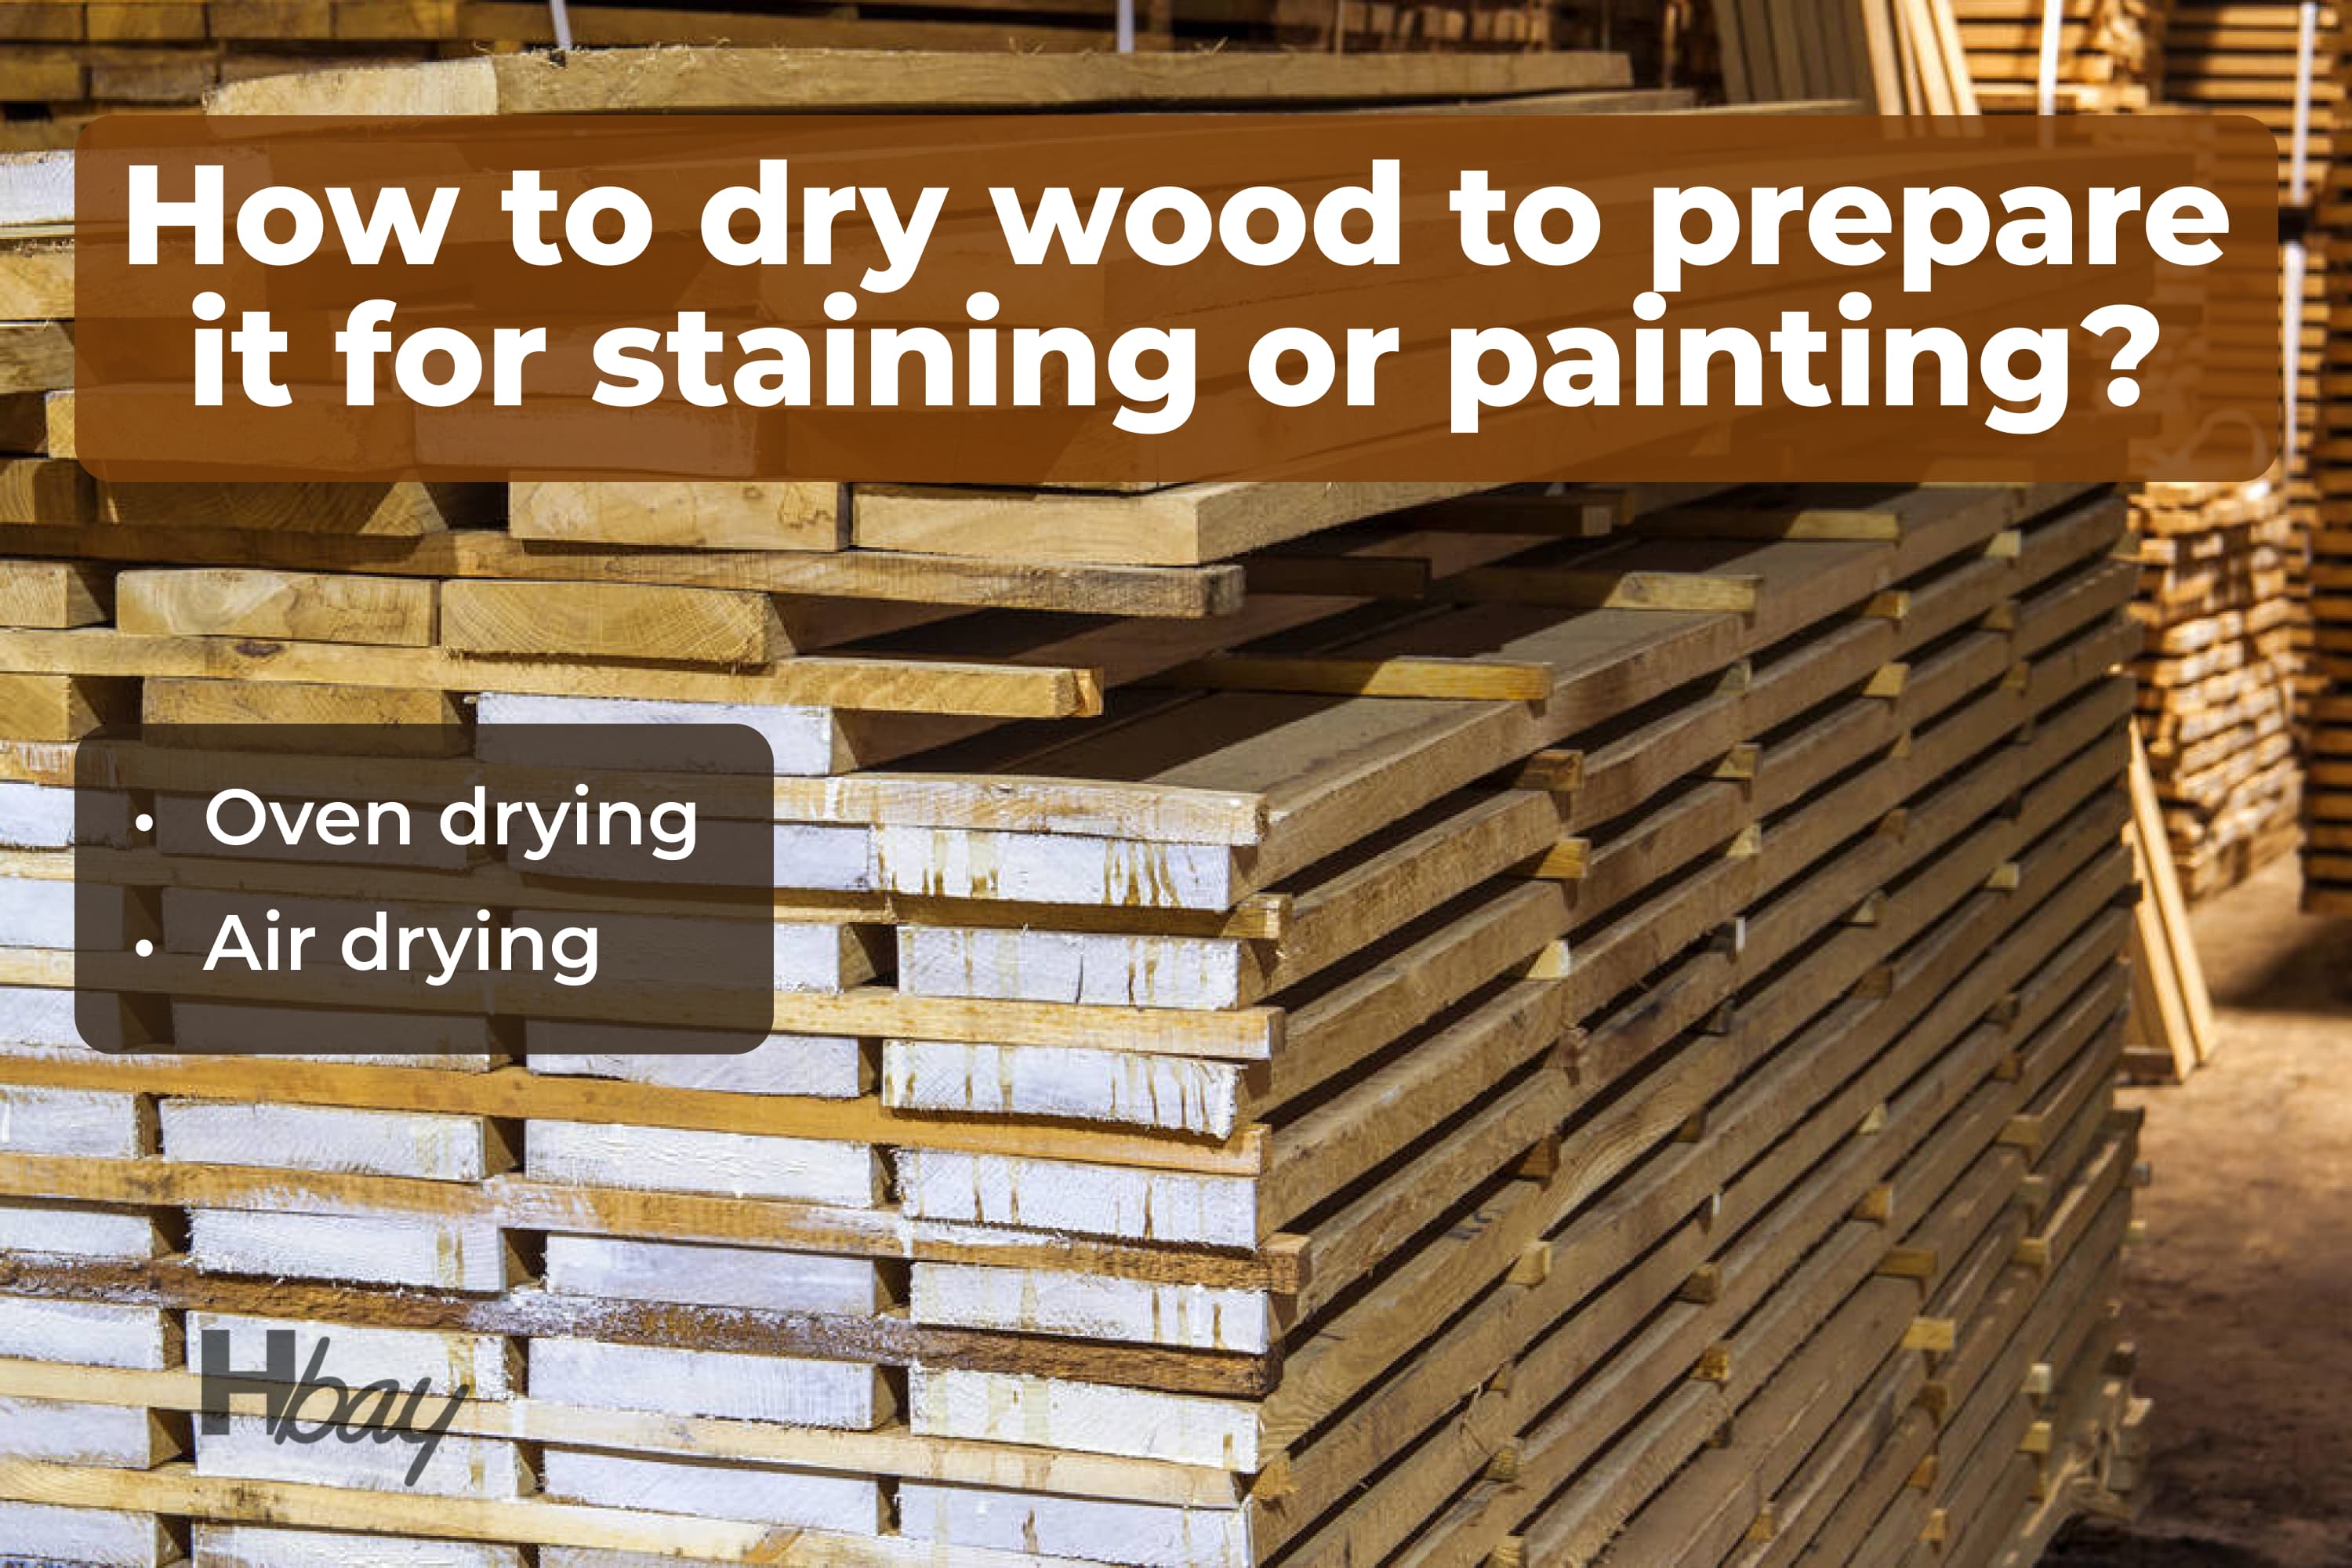 How to dry wood to prepare it for staining or painting